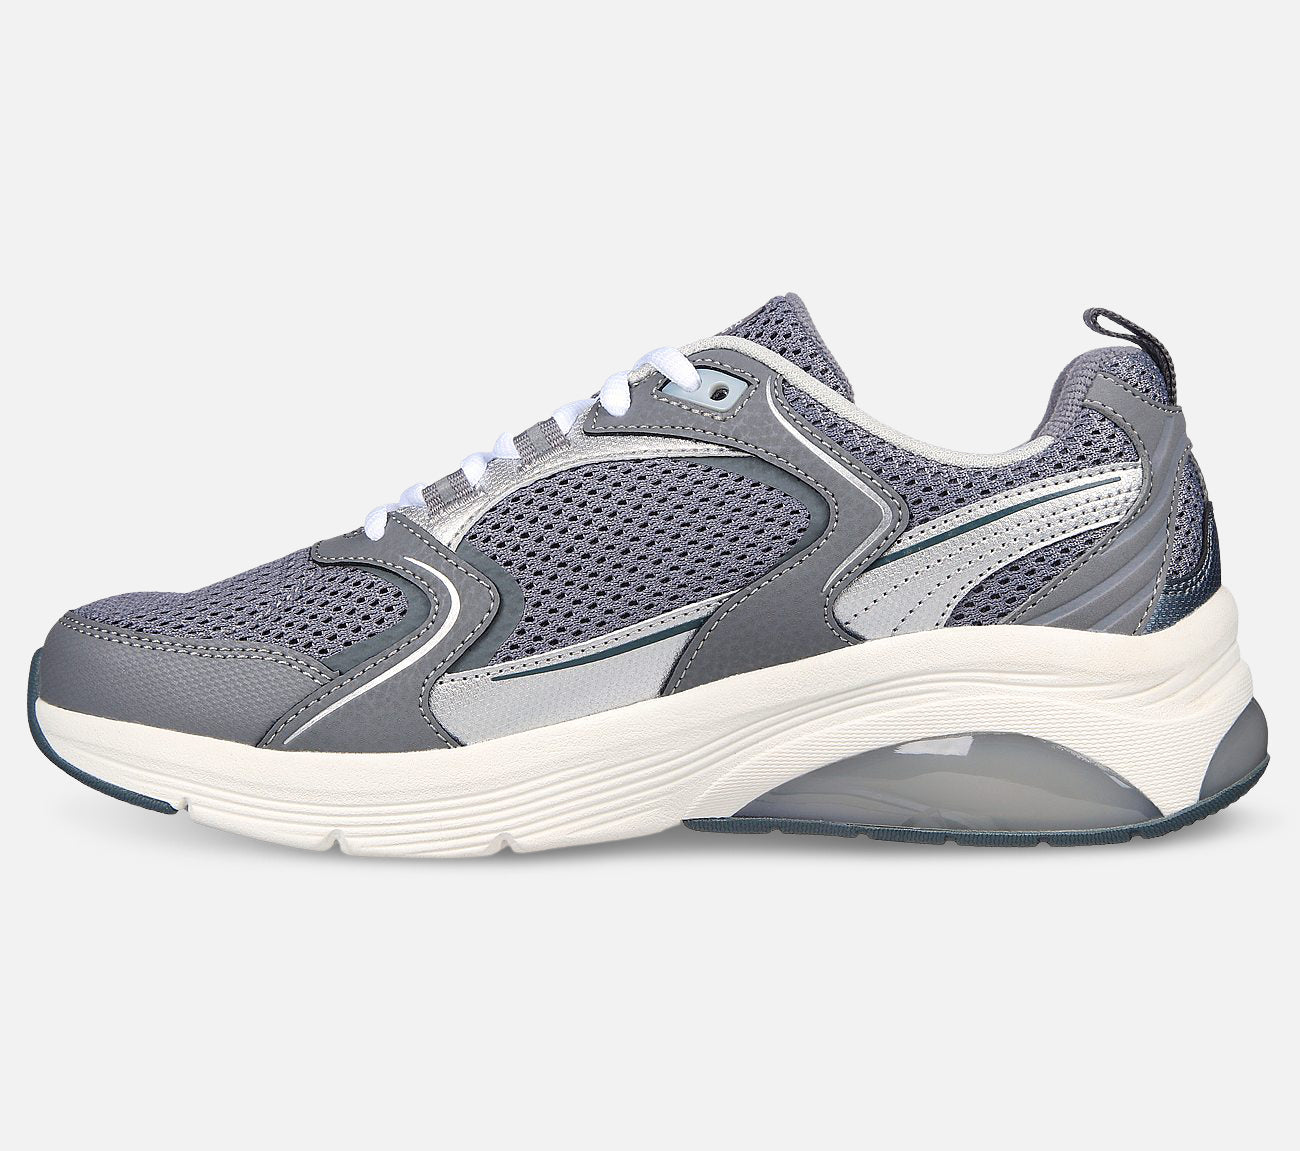 Skech-Air Extreme 2.0 - Daily Run Shoe Skechers